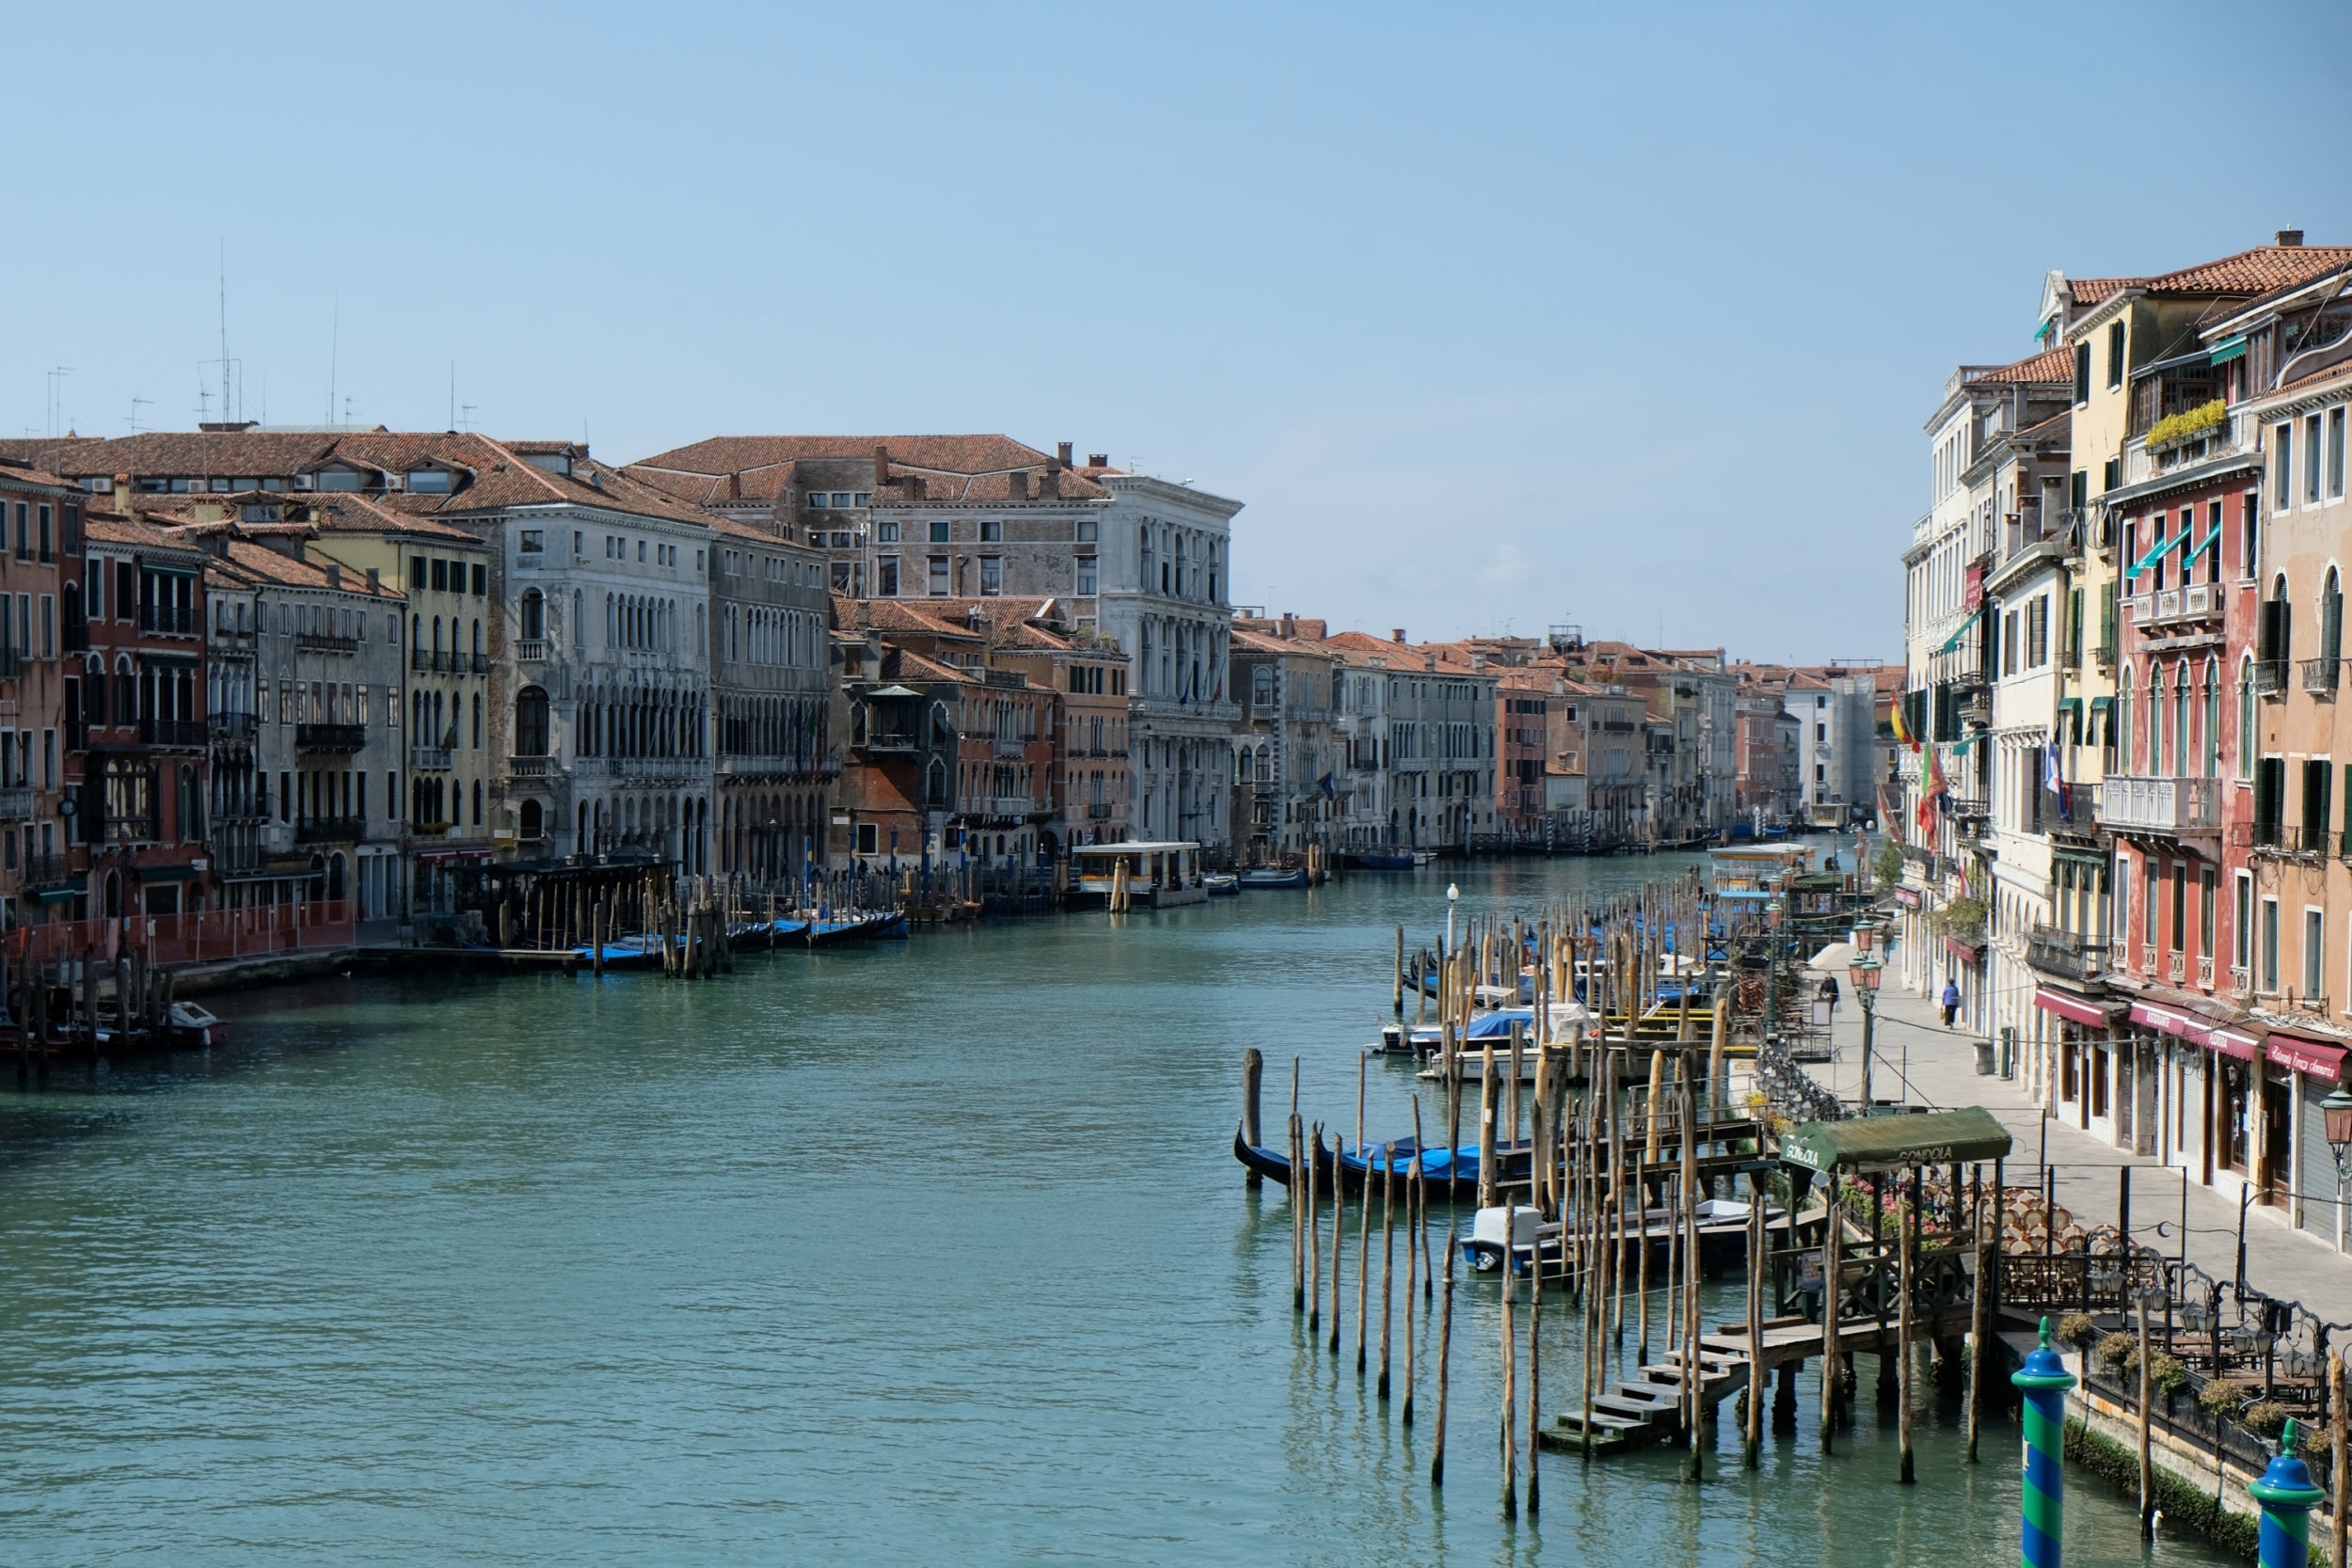 A general view of Grand Canal, which is almost deserted, seen from the Rialto Bridge, during Italy's coronavirus lockdown